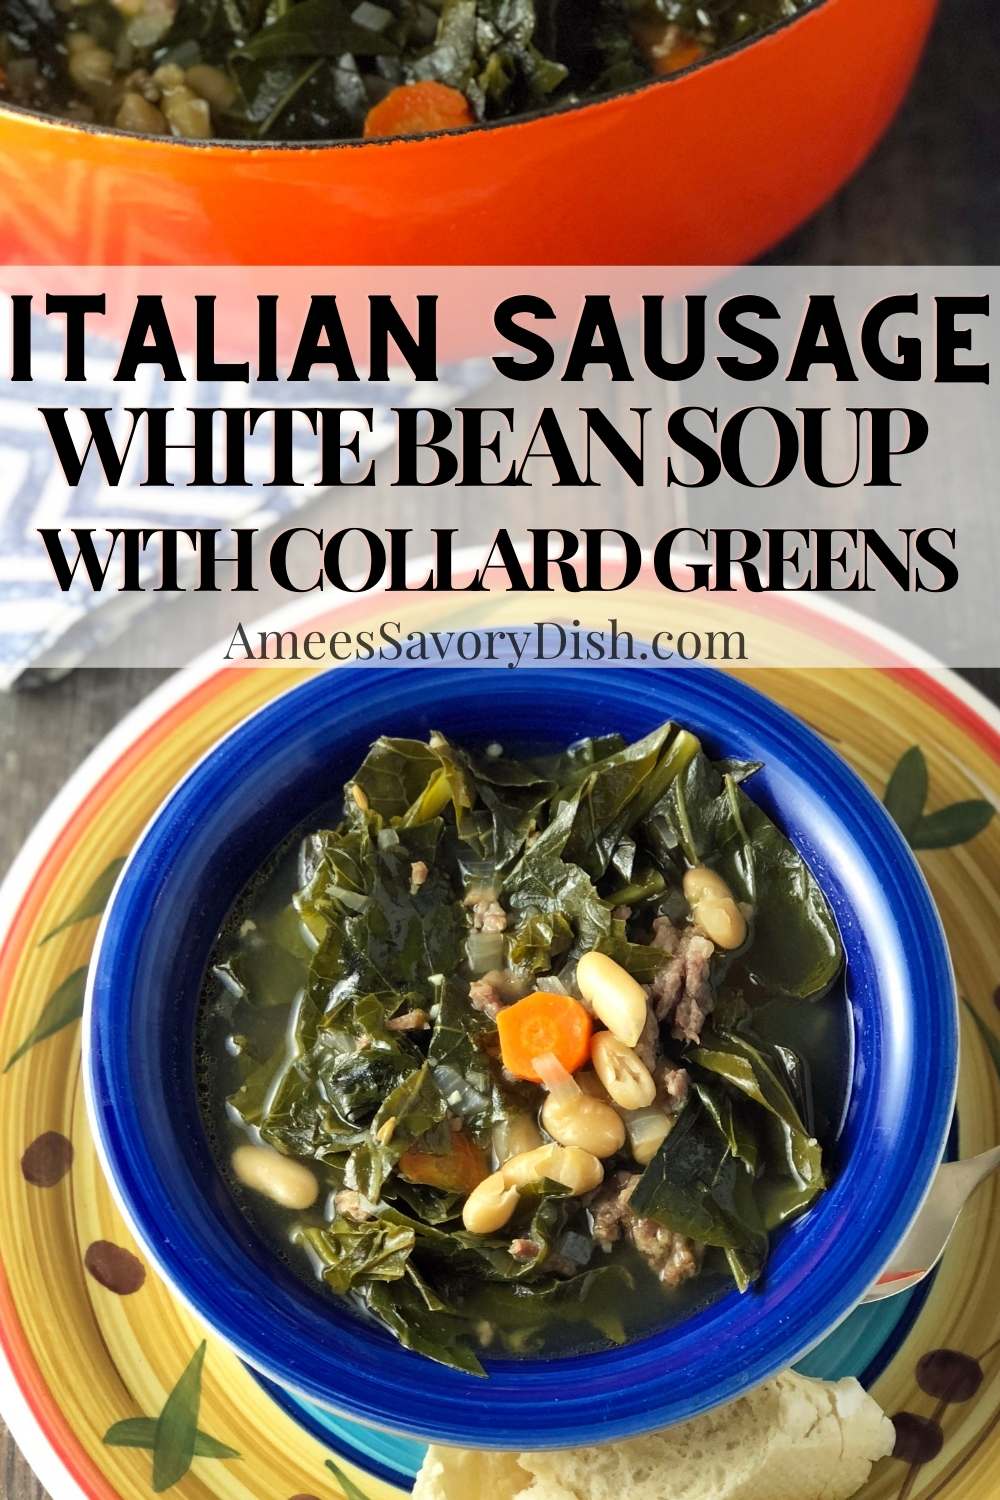 This delicious and easy soup white bean soup recipe is made with chopped collard greens, carrots, onions, Italian sausage, olive oil, and white cannellini beans via @Ameessavorydish